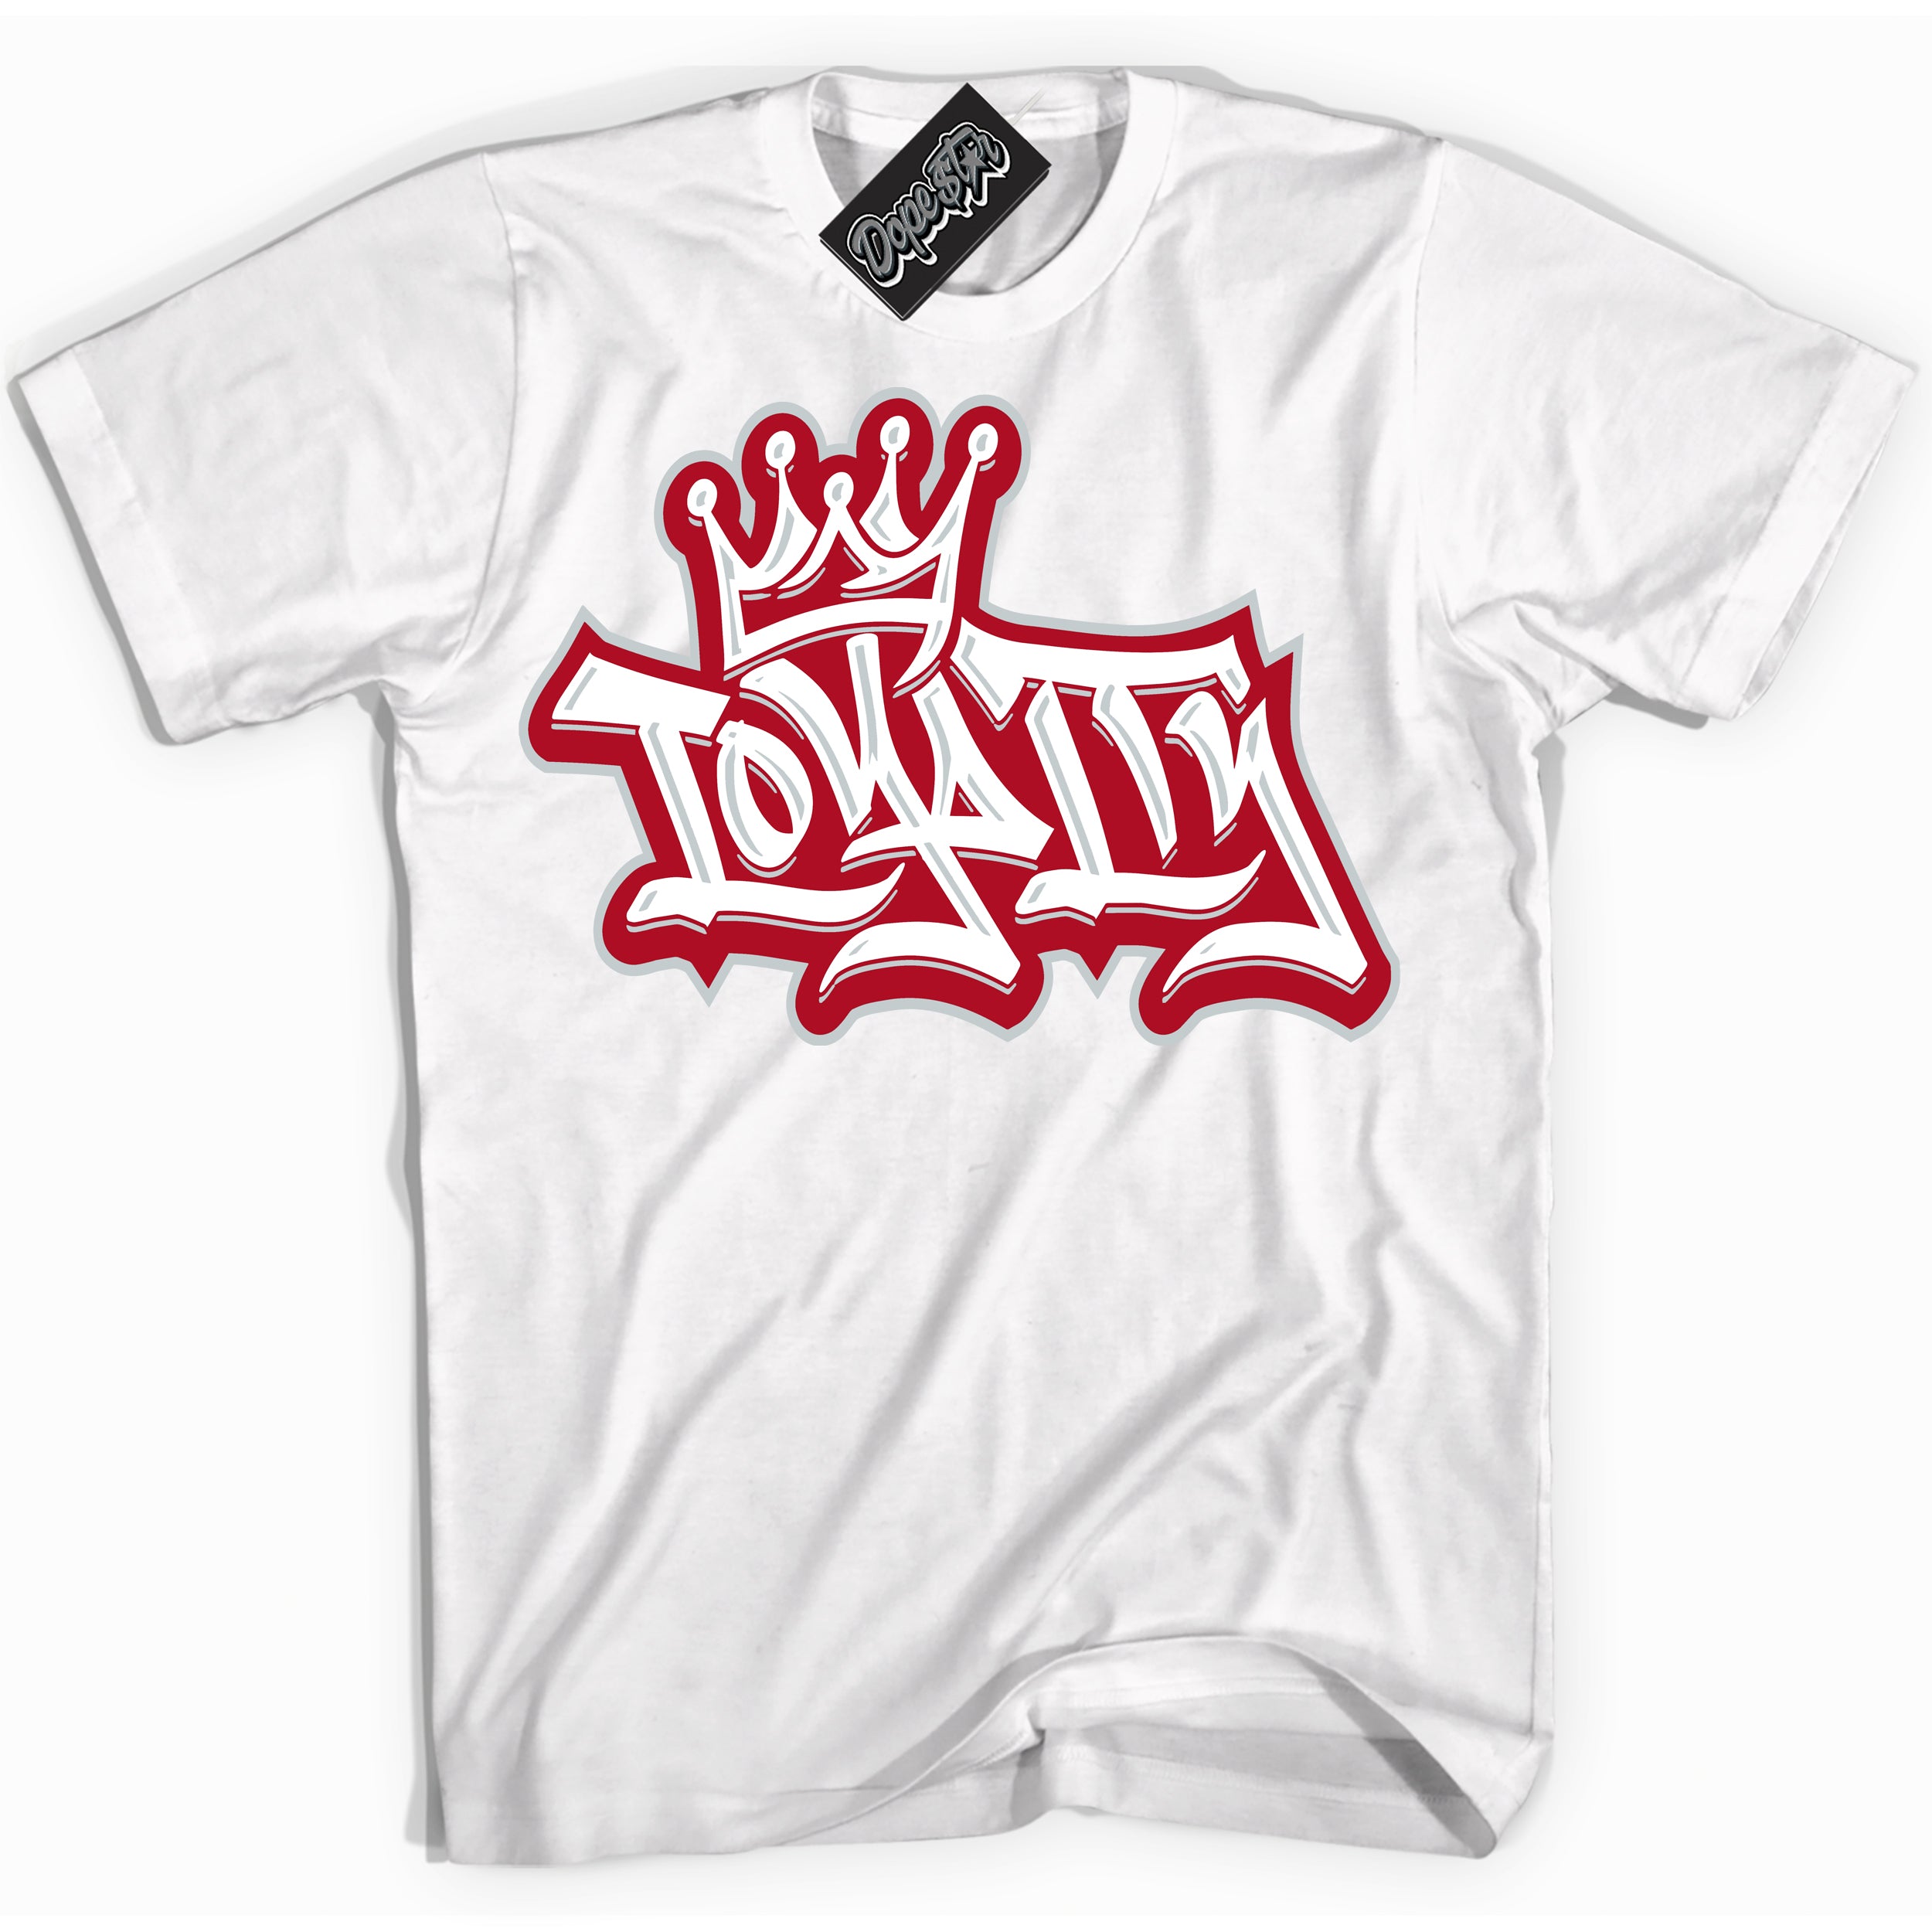 Cool White Shirt with “ Loyalty Crown” design that perfectly matches Reverse Ultraman Sneakers.